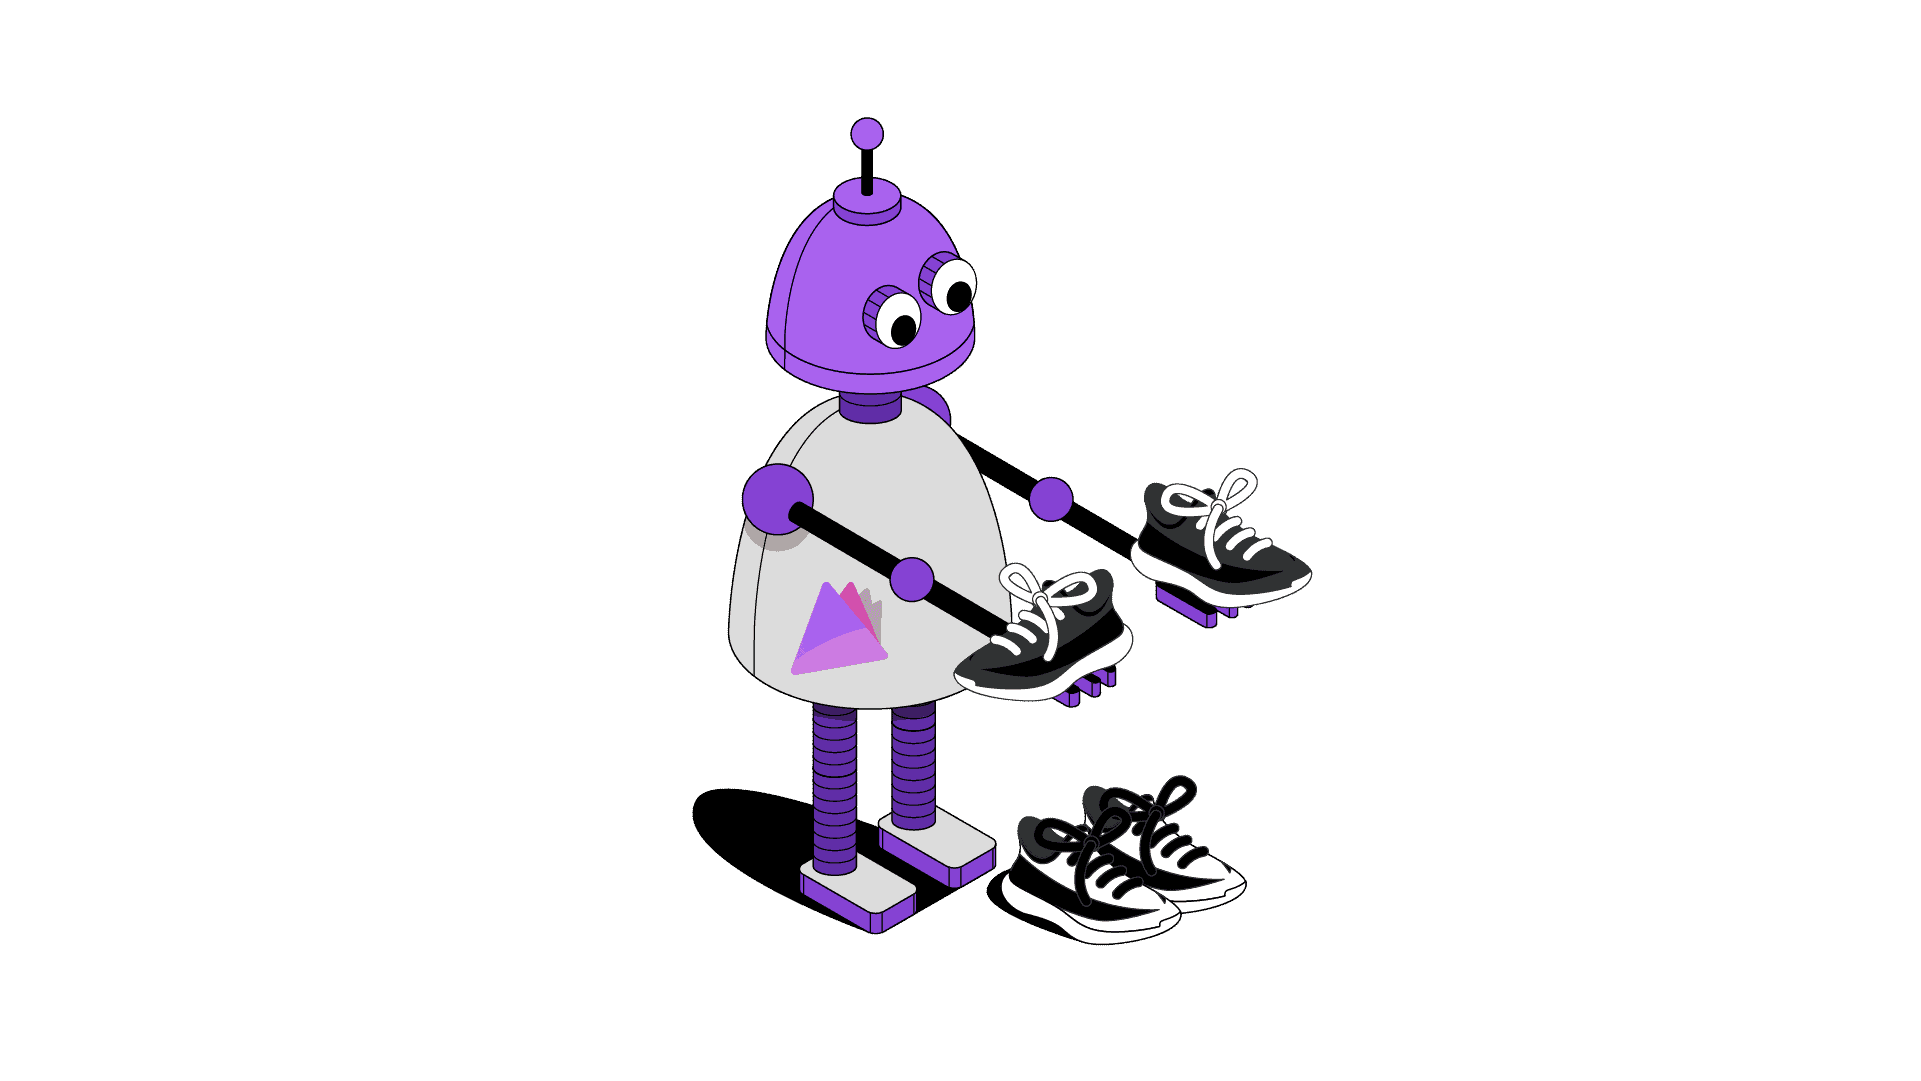 Prism bot holding a pair of sneakers